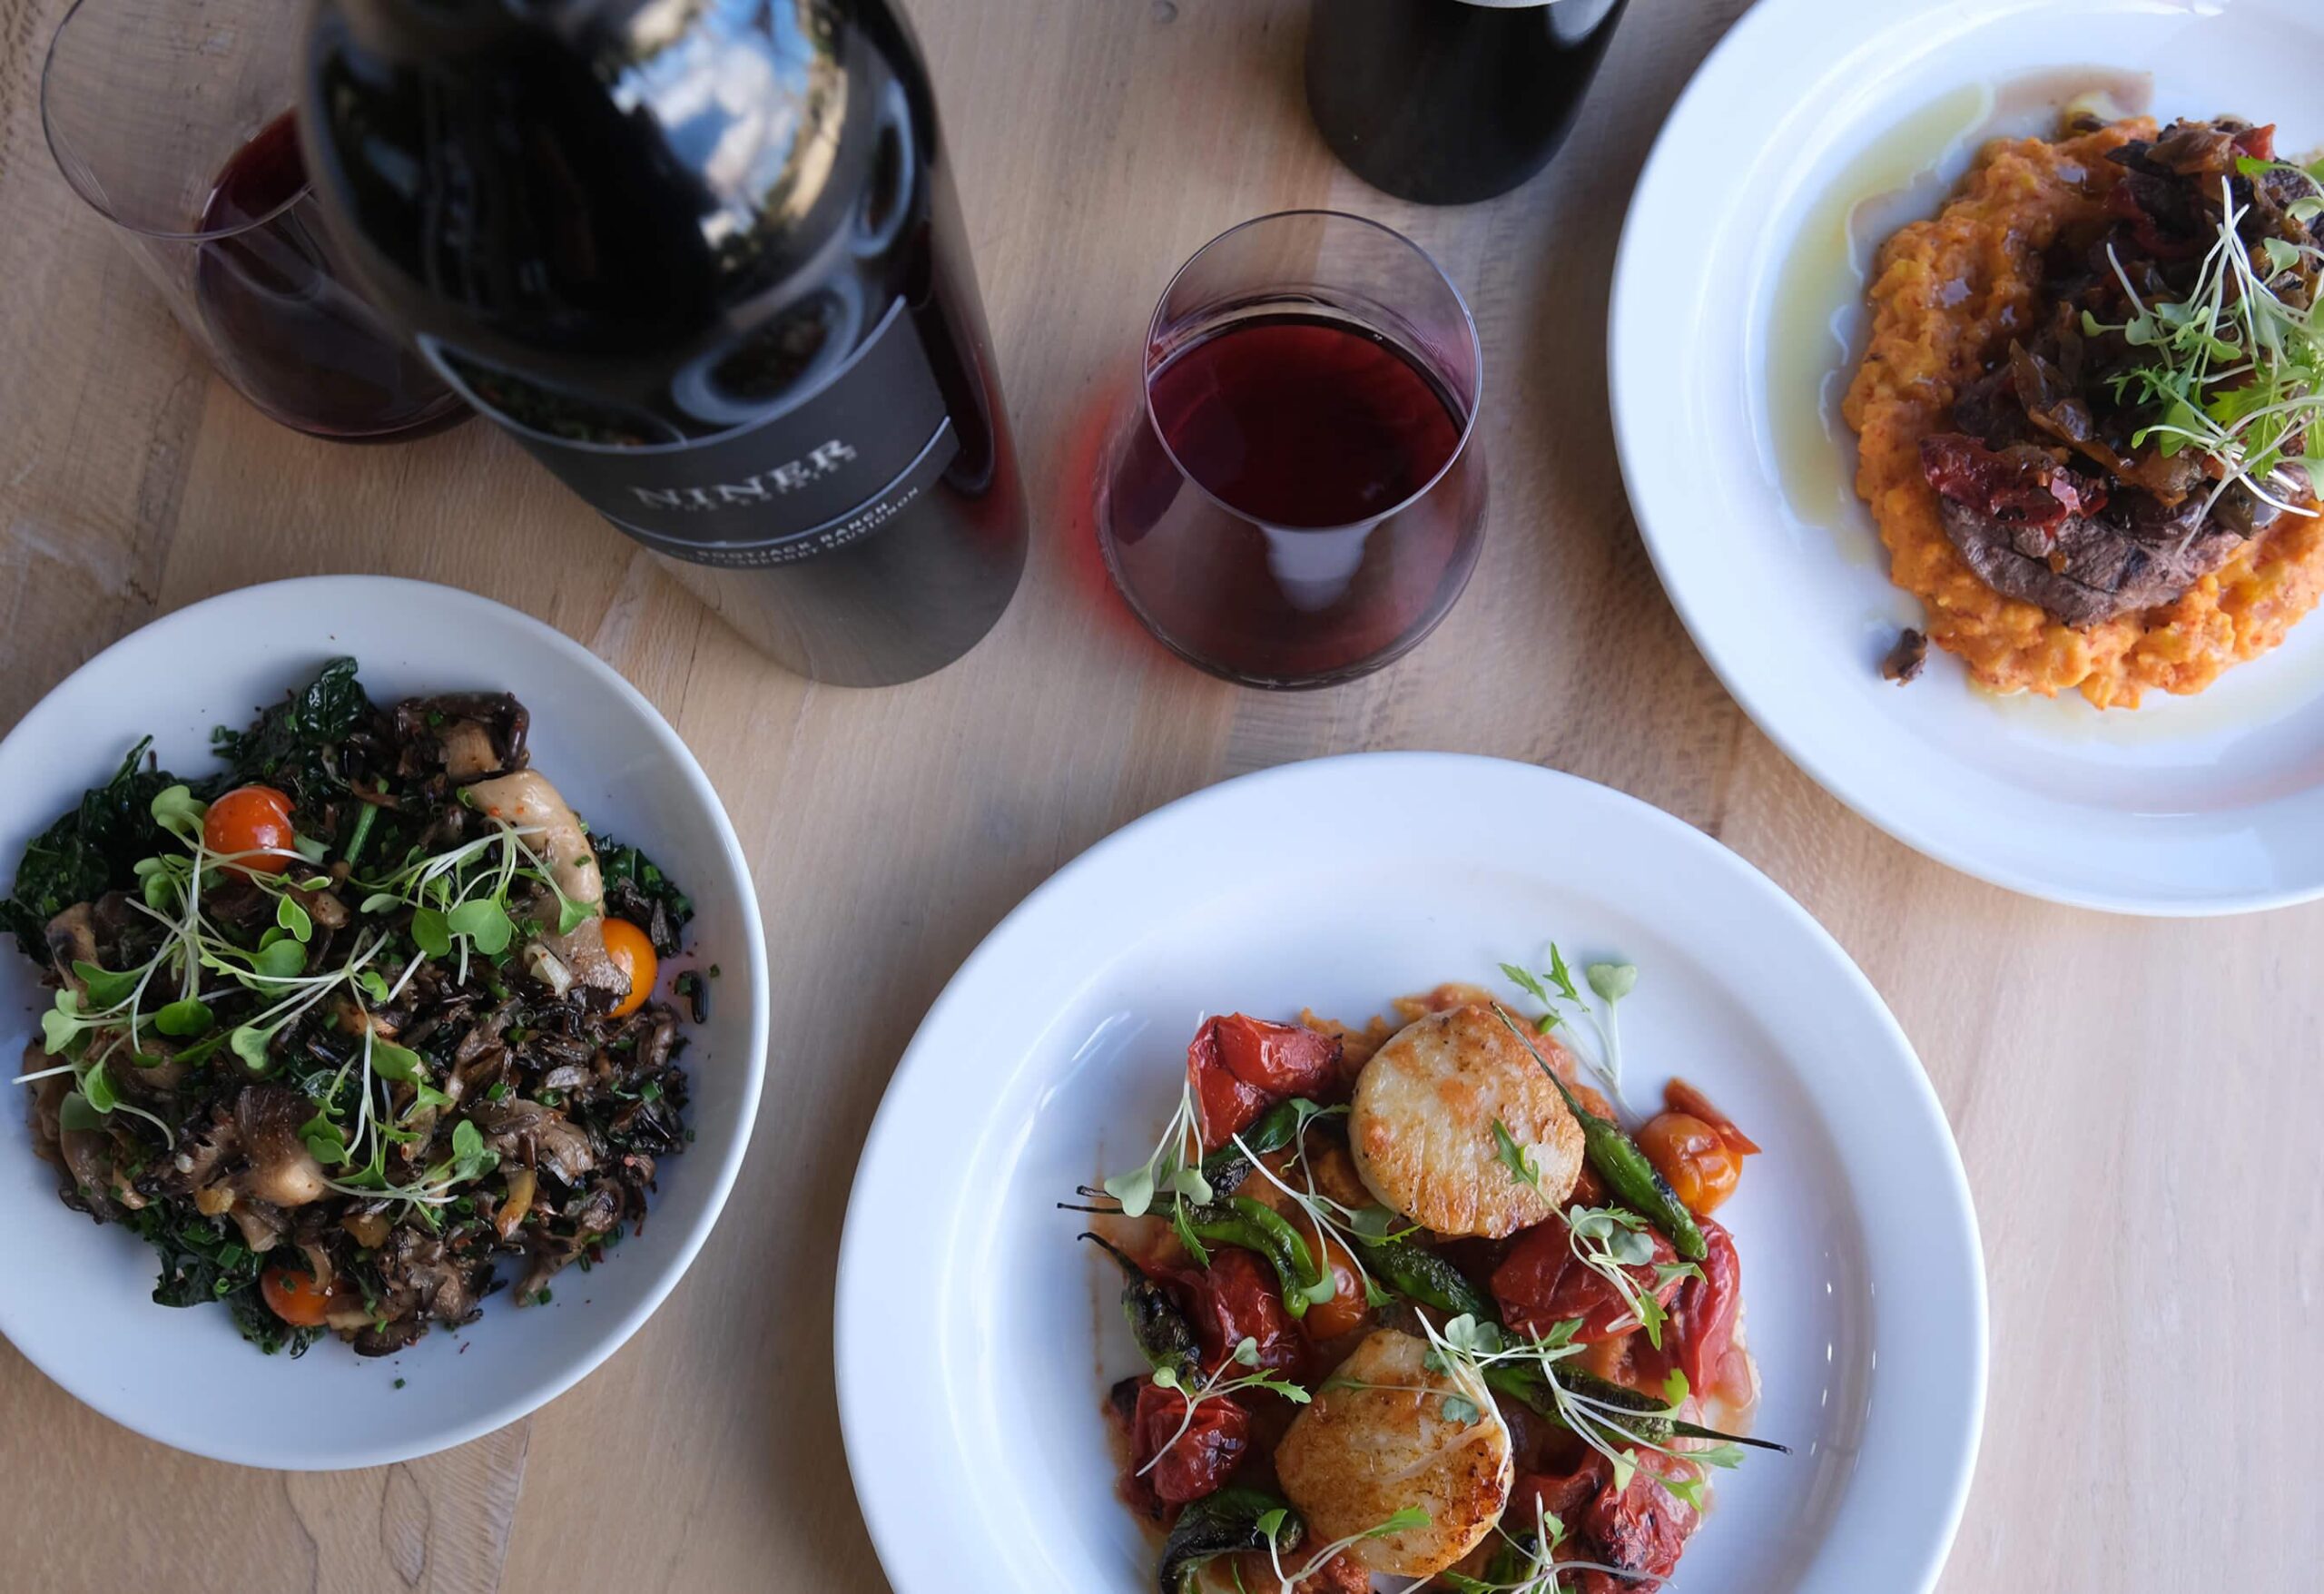 An array of colorful dishes and a bottle and glass of wine on a table, including scallops, steak and wild rice.